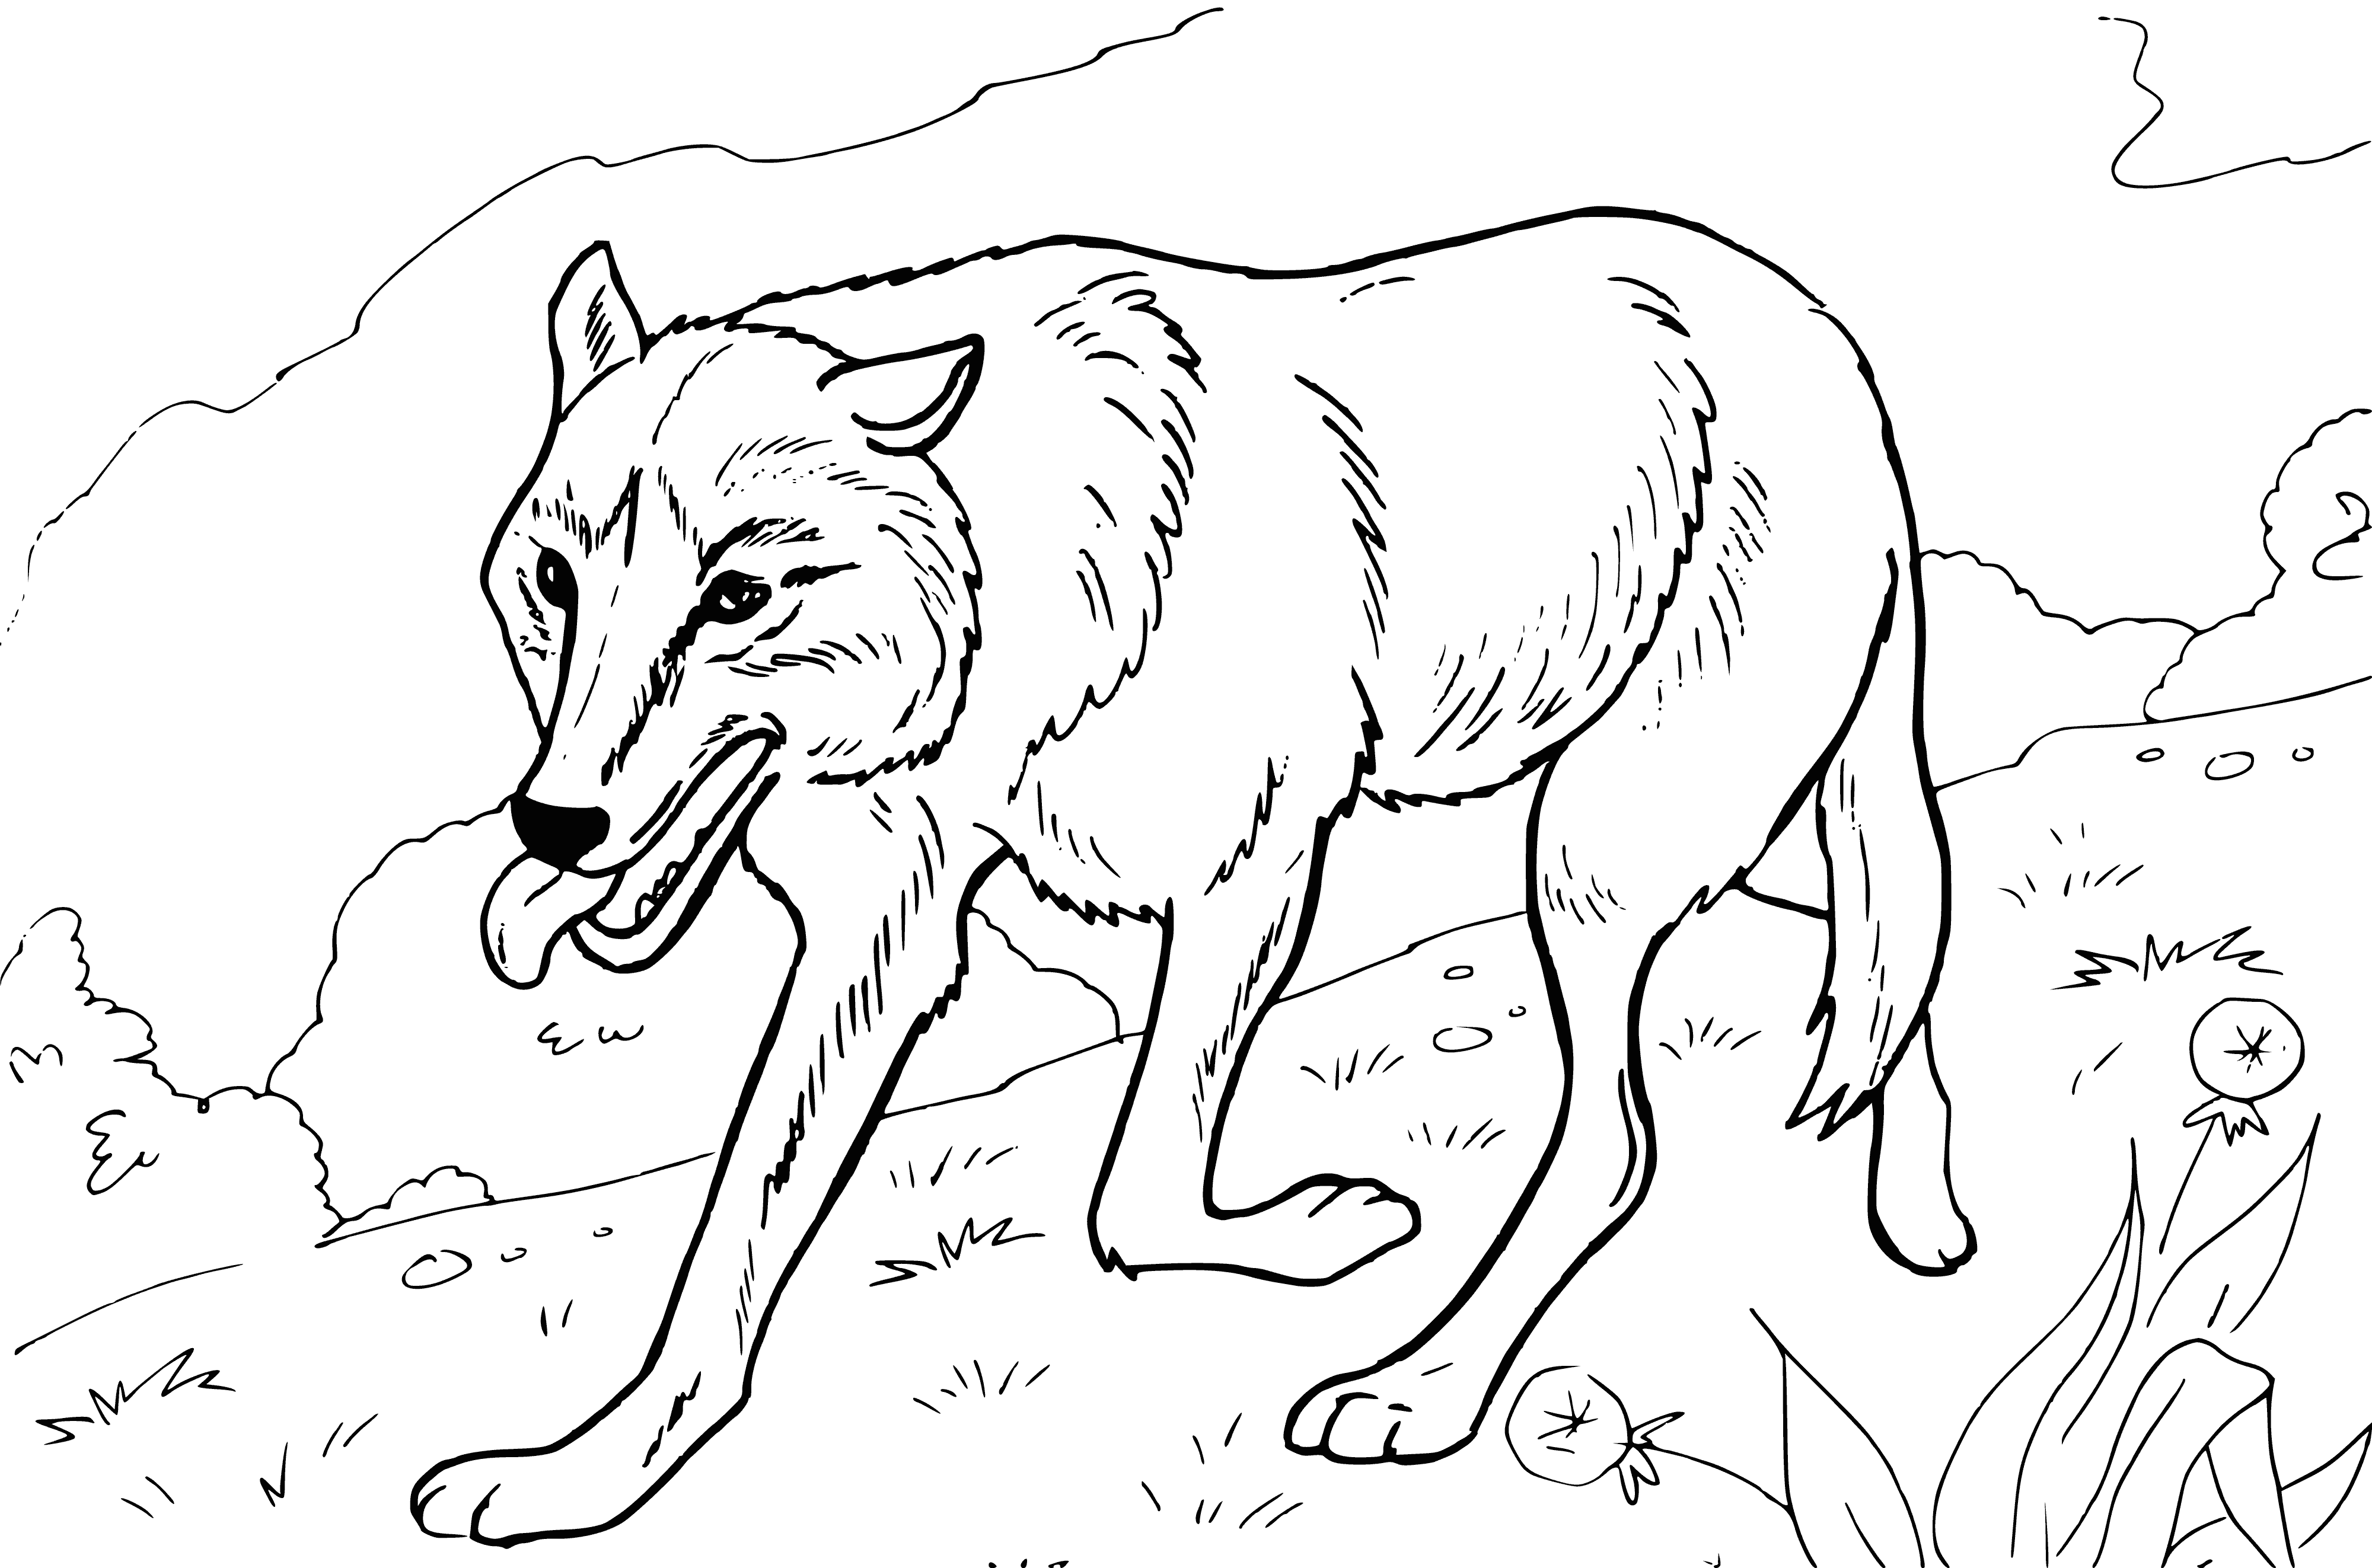 coloring page: Wolf on the hunt, ears perked, mouth open, grayish-brown fur, bushy tail.